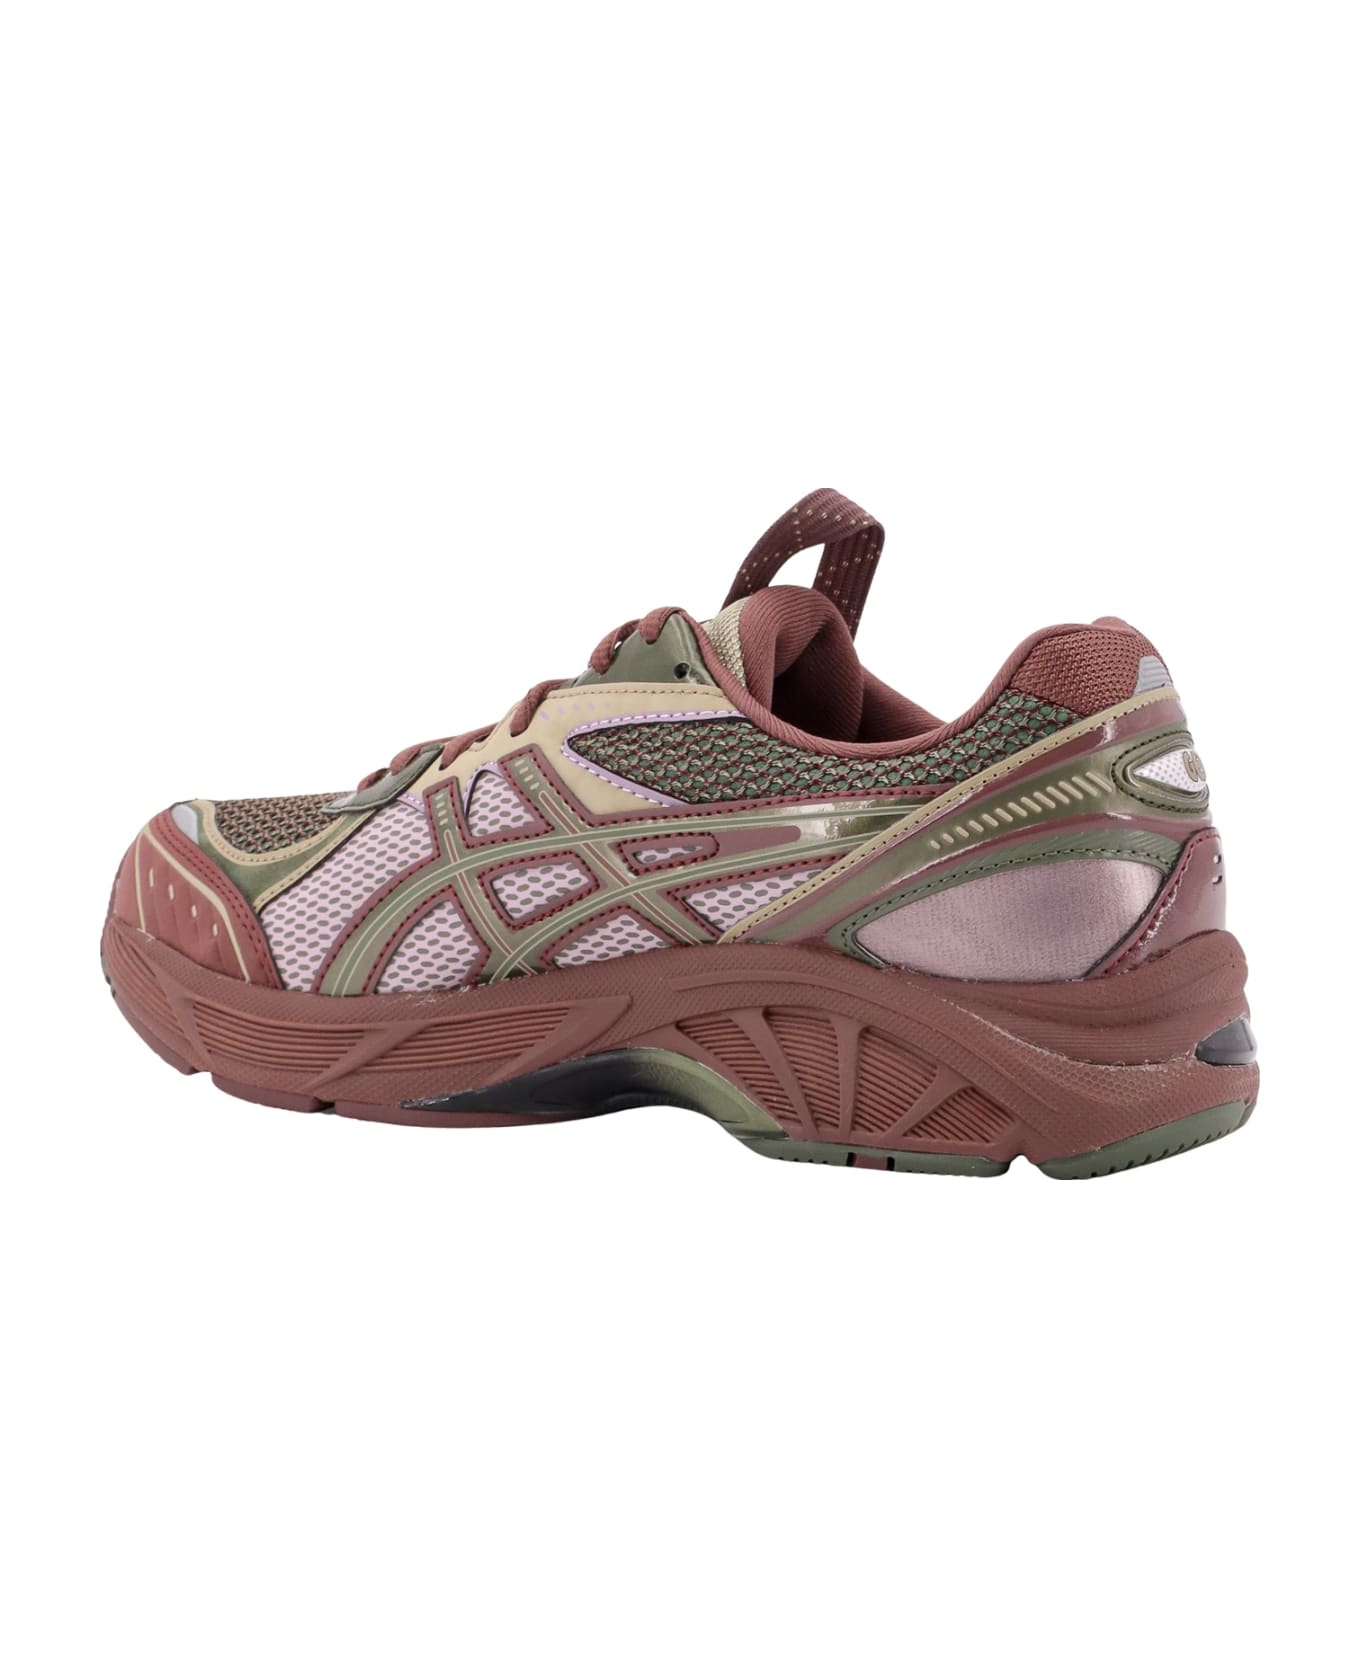 Asics Ub6-s Gt-2160 Sneakers - Pink